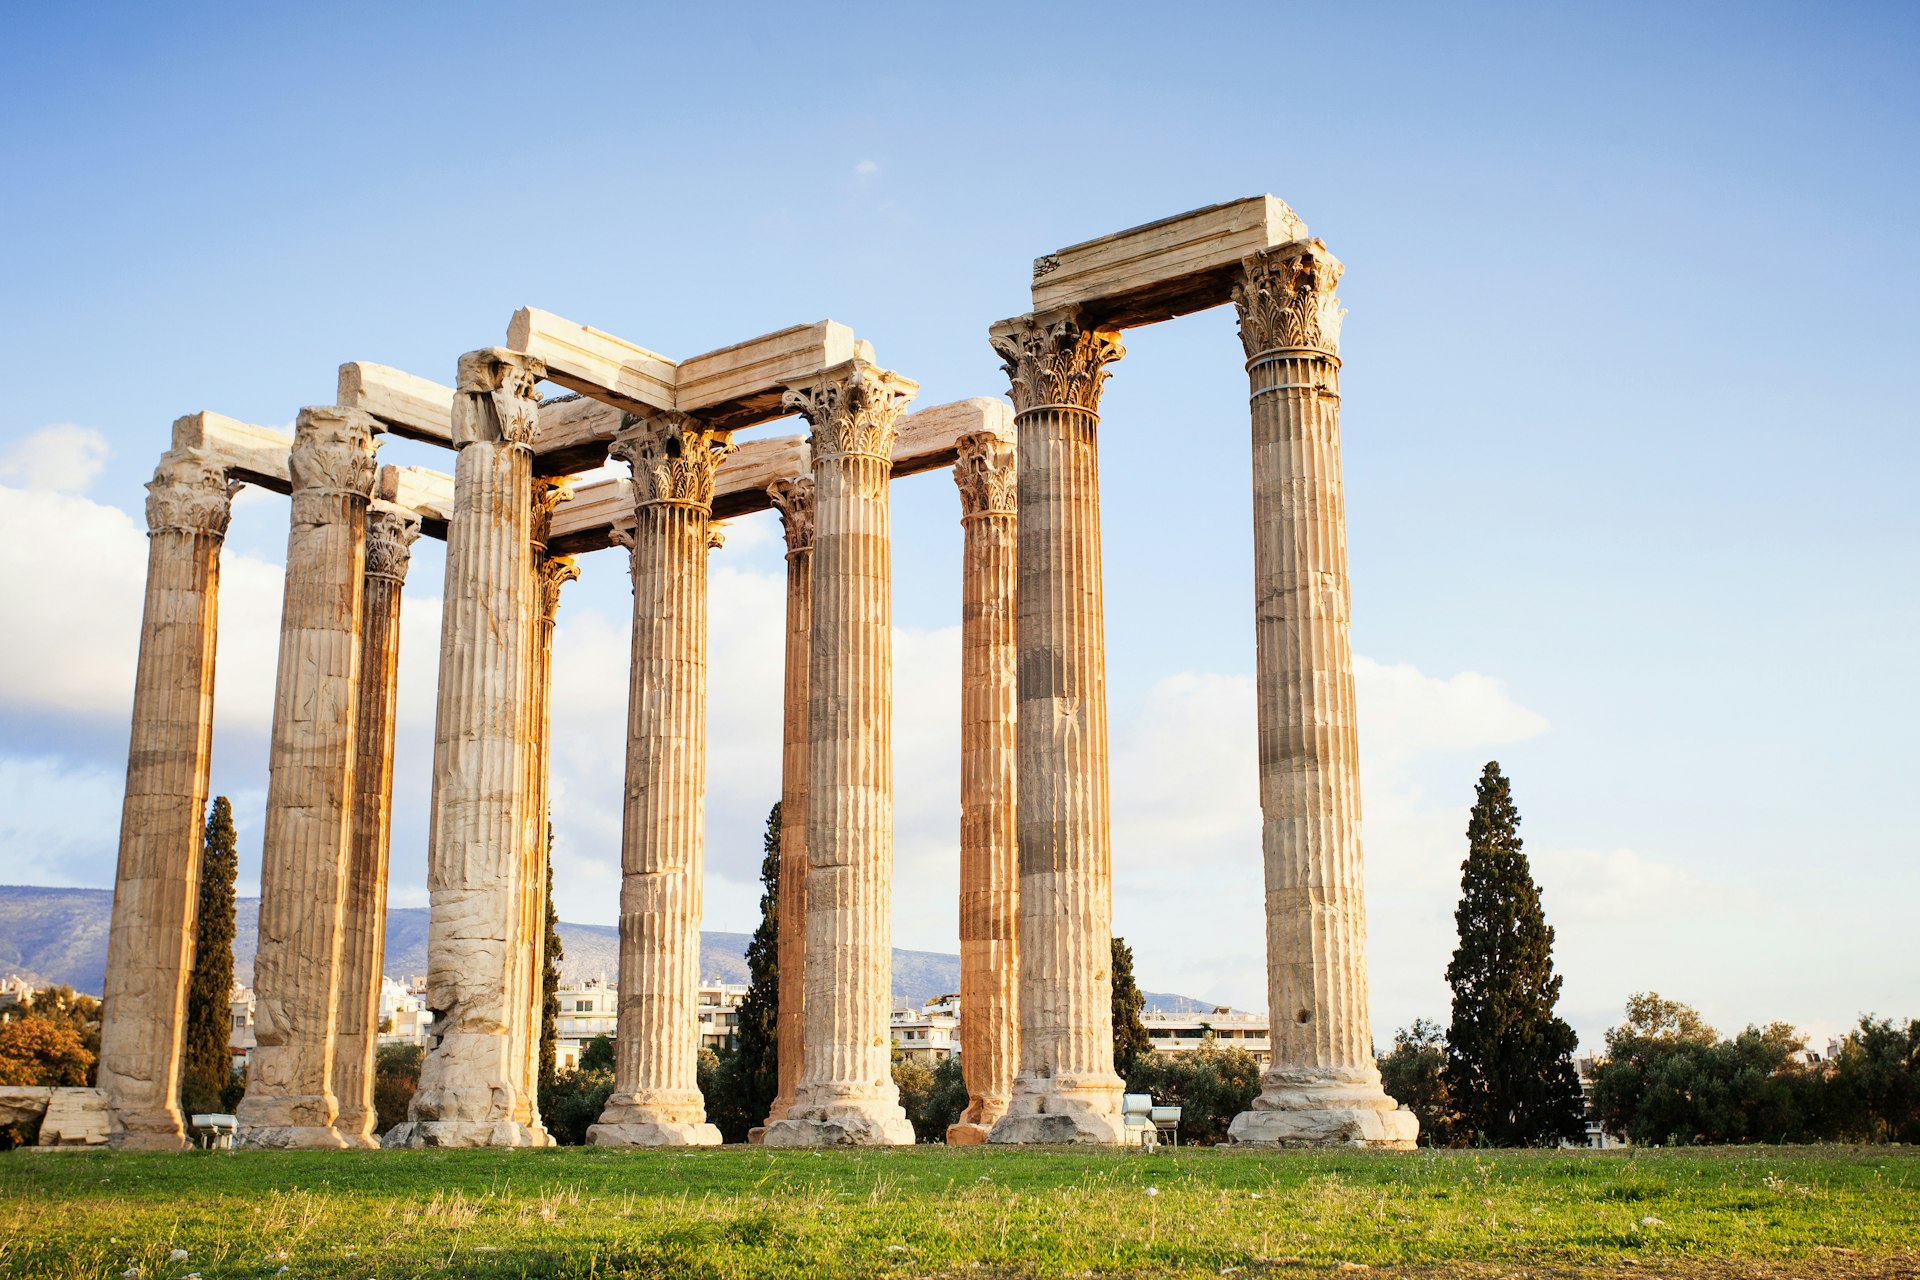 The columns of the Temple of Olympian Zeus in Athens sit in the sunshine